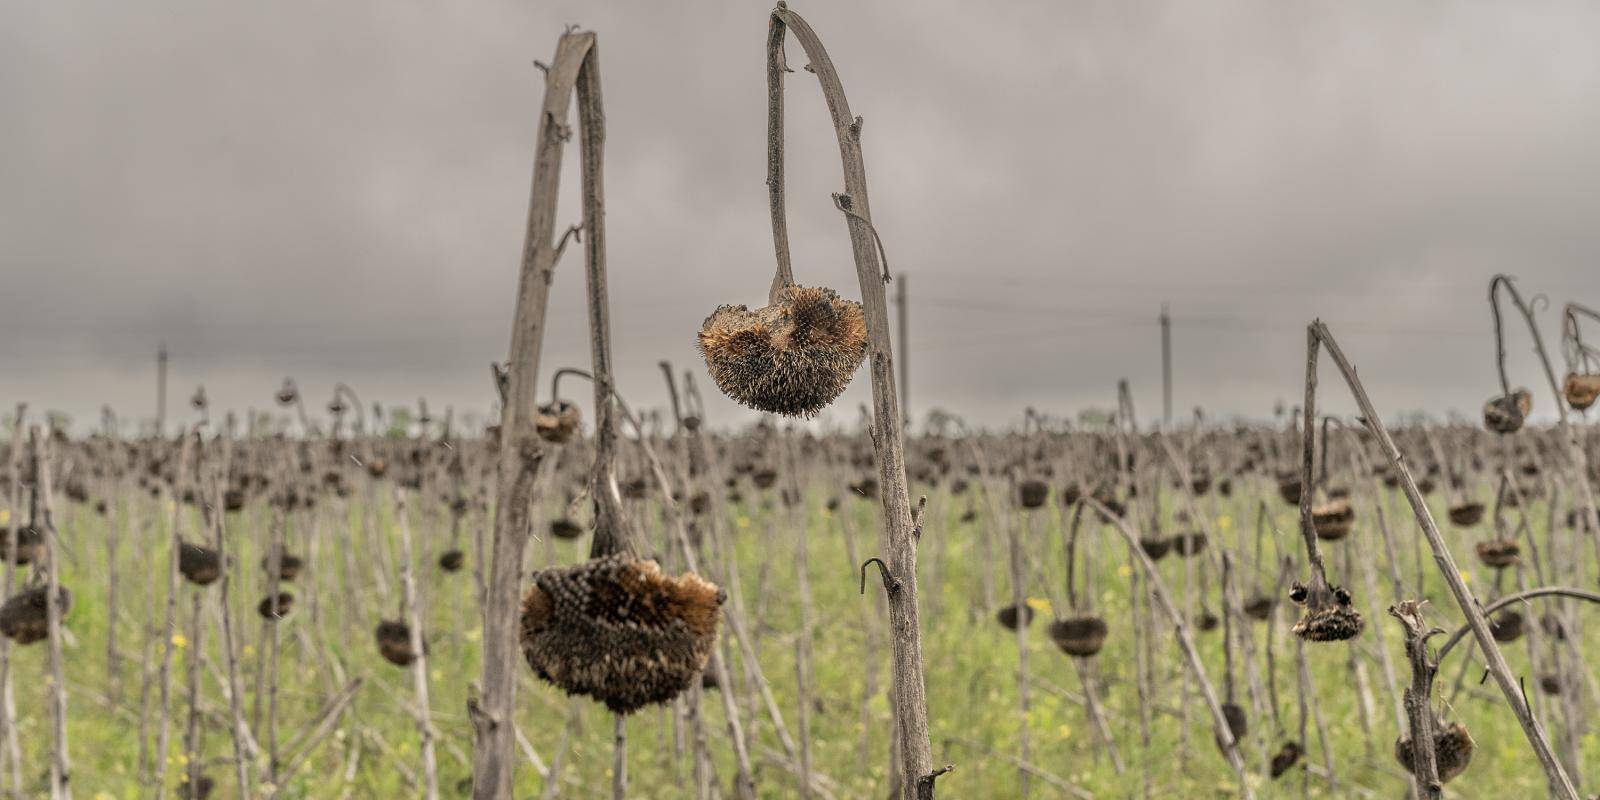 A field of decaying sunflowers unharvested due to the ongoing war in Ukraine against a grey sky.